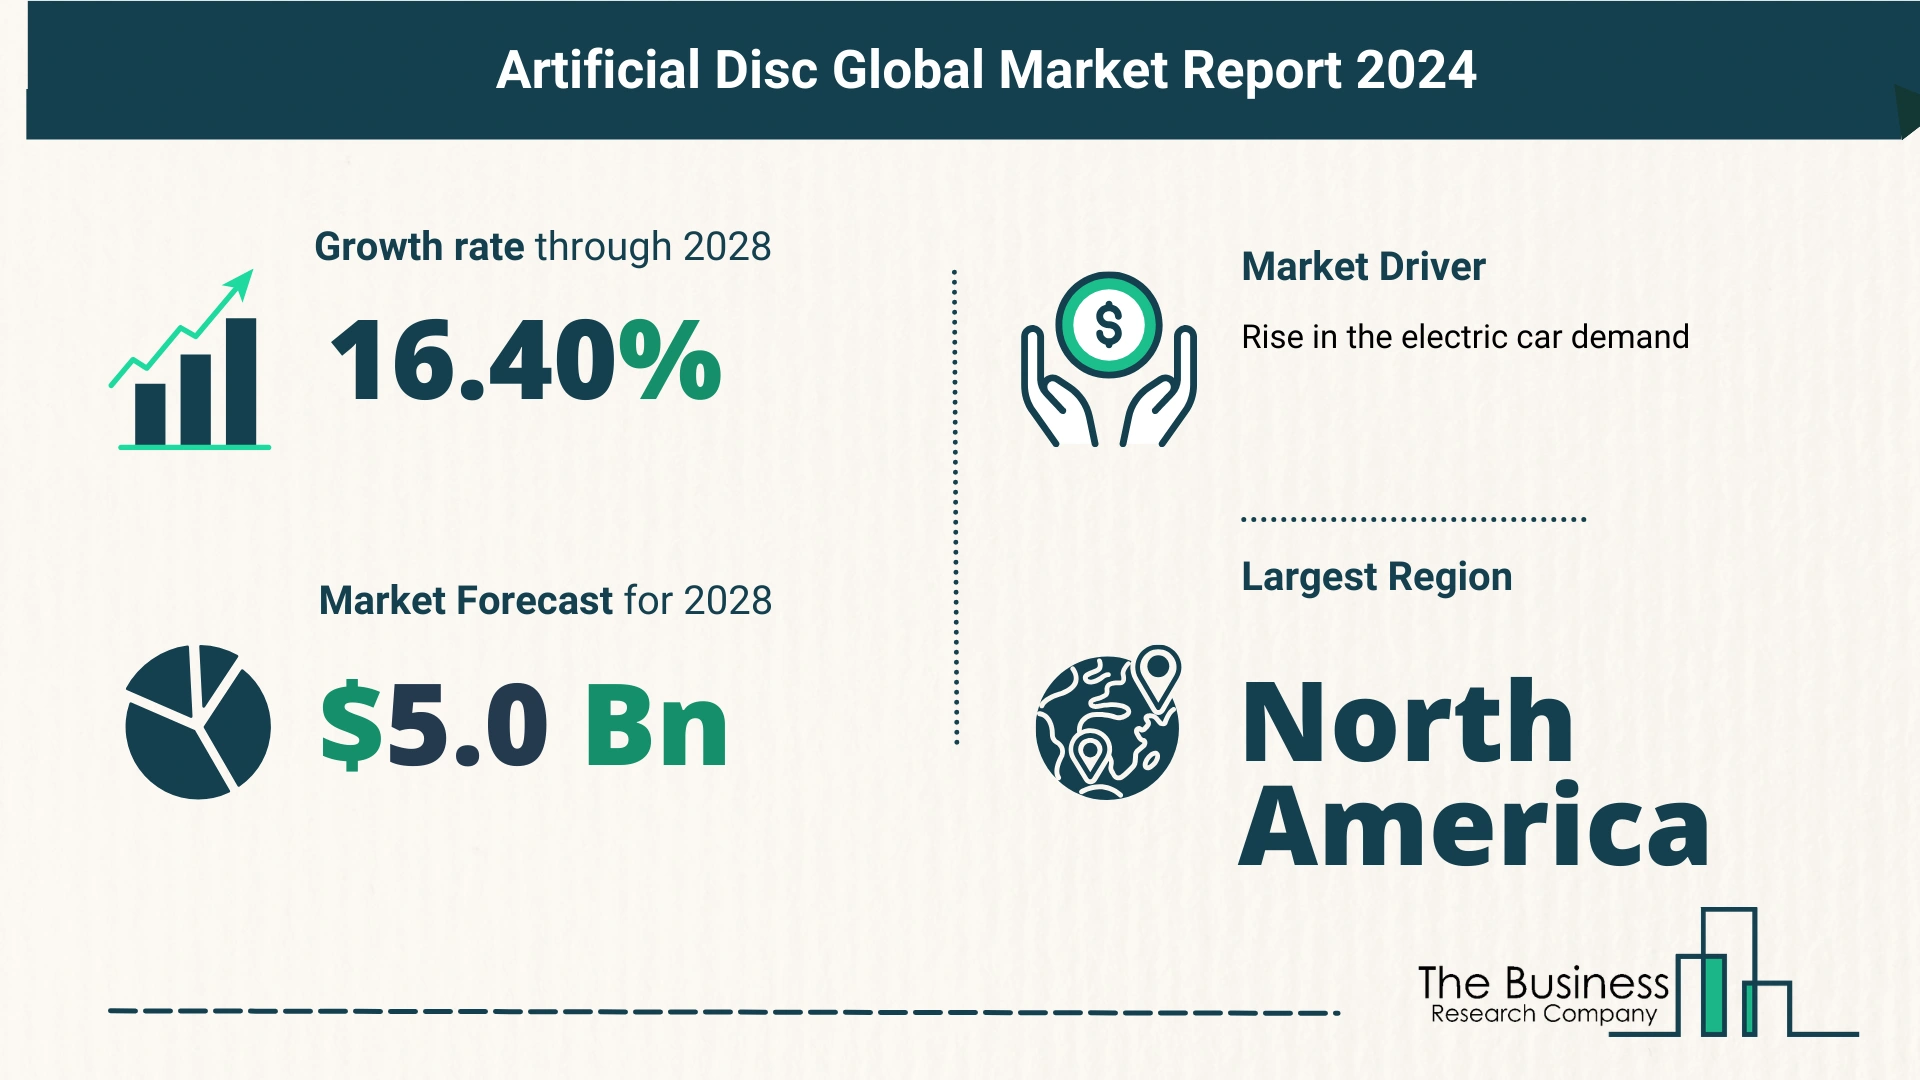 Key Takeaways From The Global Artificial Disc Market Forecast 2024